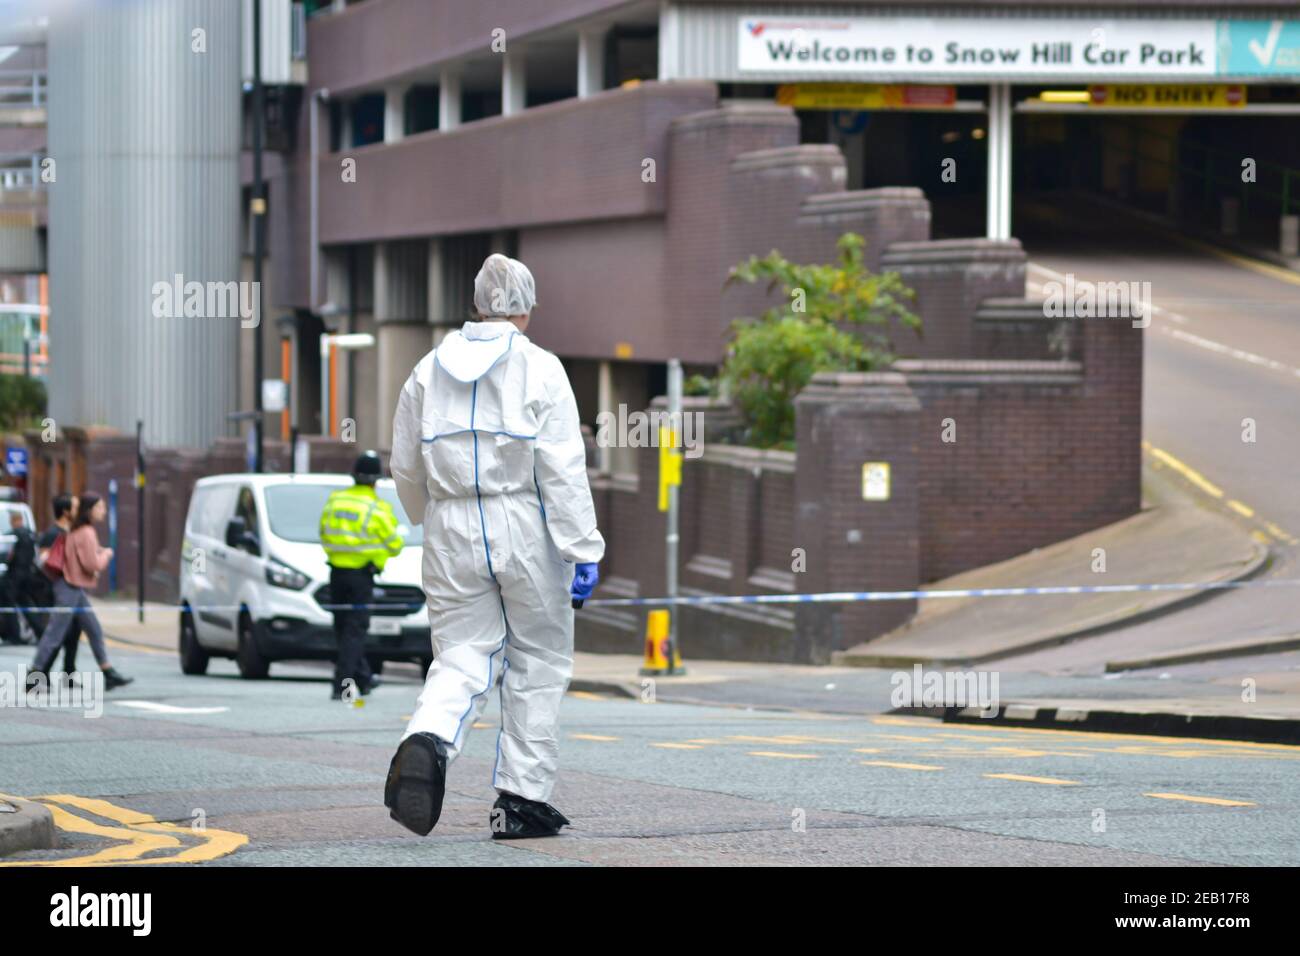 Forensics at one of the stabbing scenes on September 6th 2020 outside Snow Hill Car Park, in Birmingham, West Midlands, UK Stock Photo